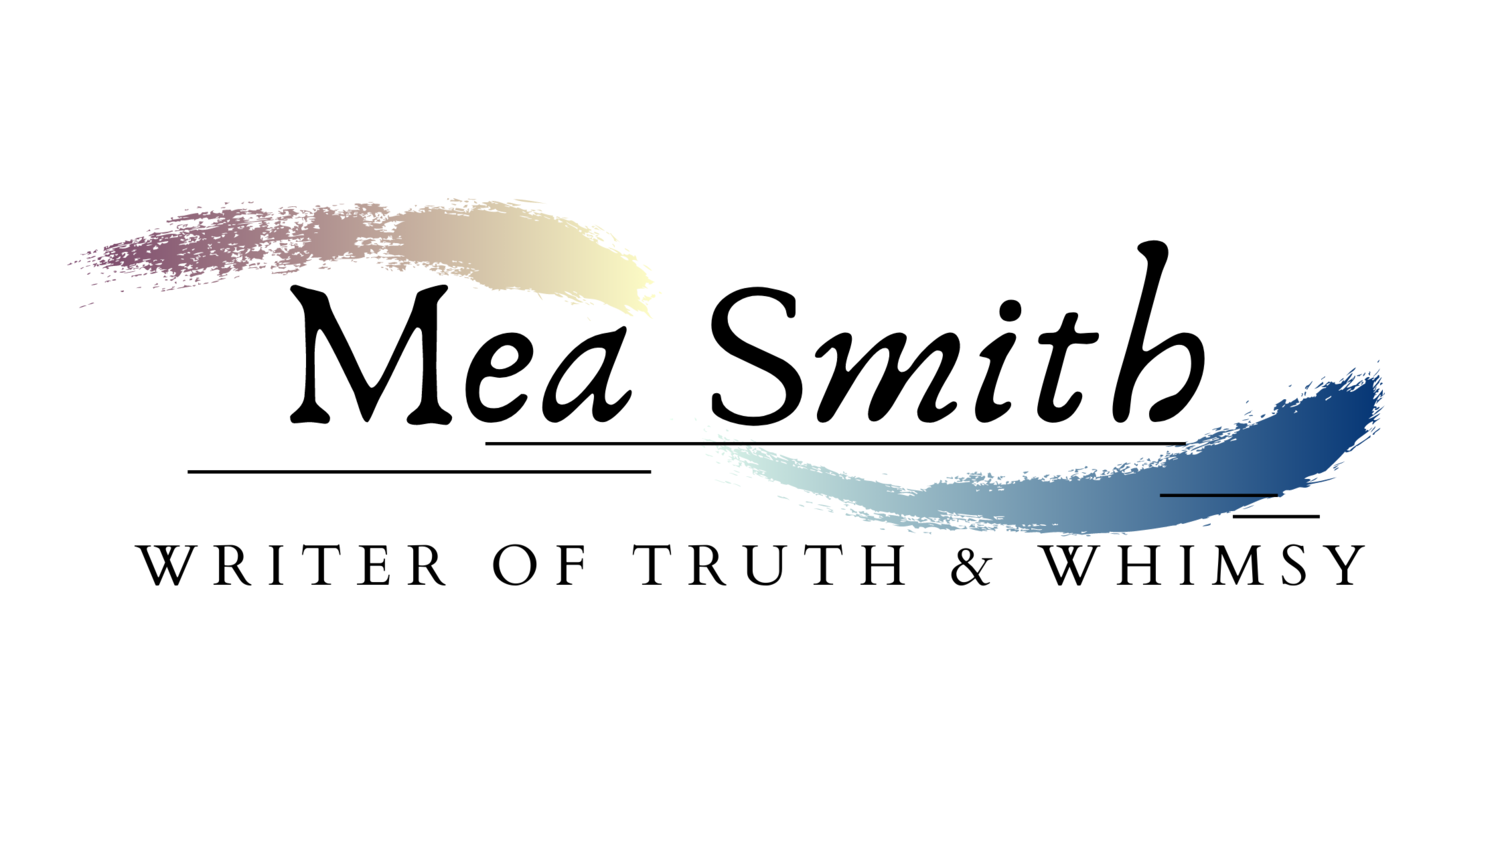 Story Swell by Mea Smith